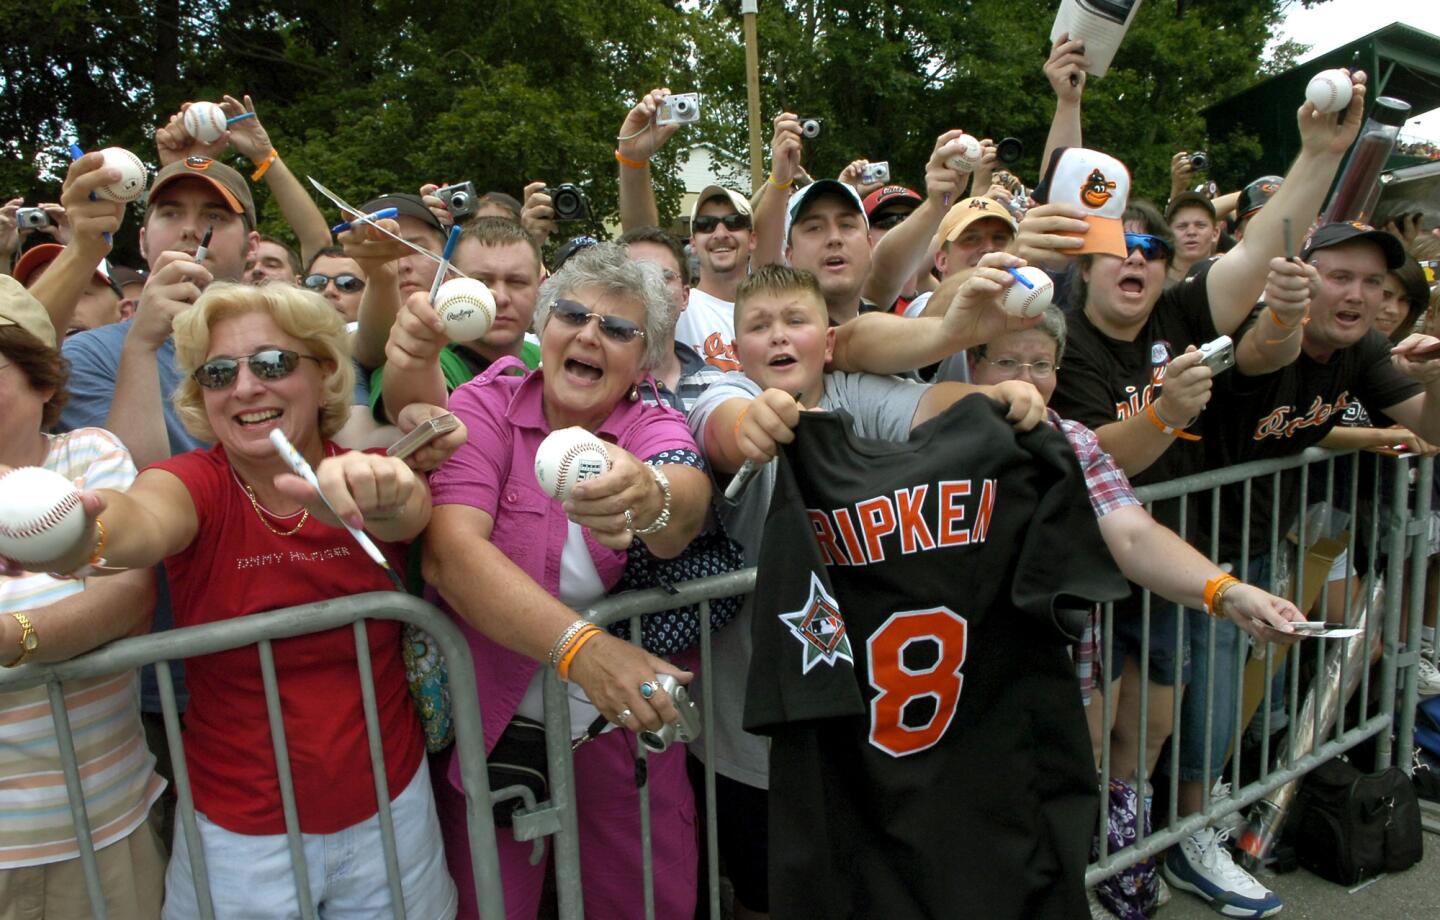 Fans try to get Cal Ripken Jr.'s autograph today after he threw out the ceremonial first pitch at the begining of the Aberdeen Ironbirds and the Oneonta Tigers New York-Penn League game held at Doubleday Field in Cooperstown, N.Y.